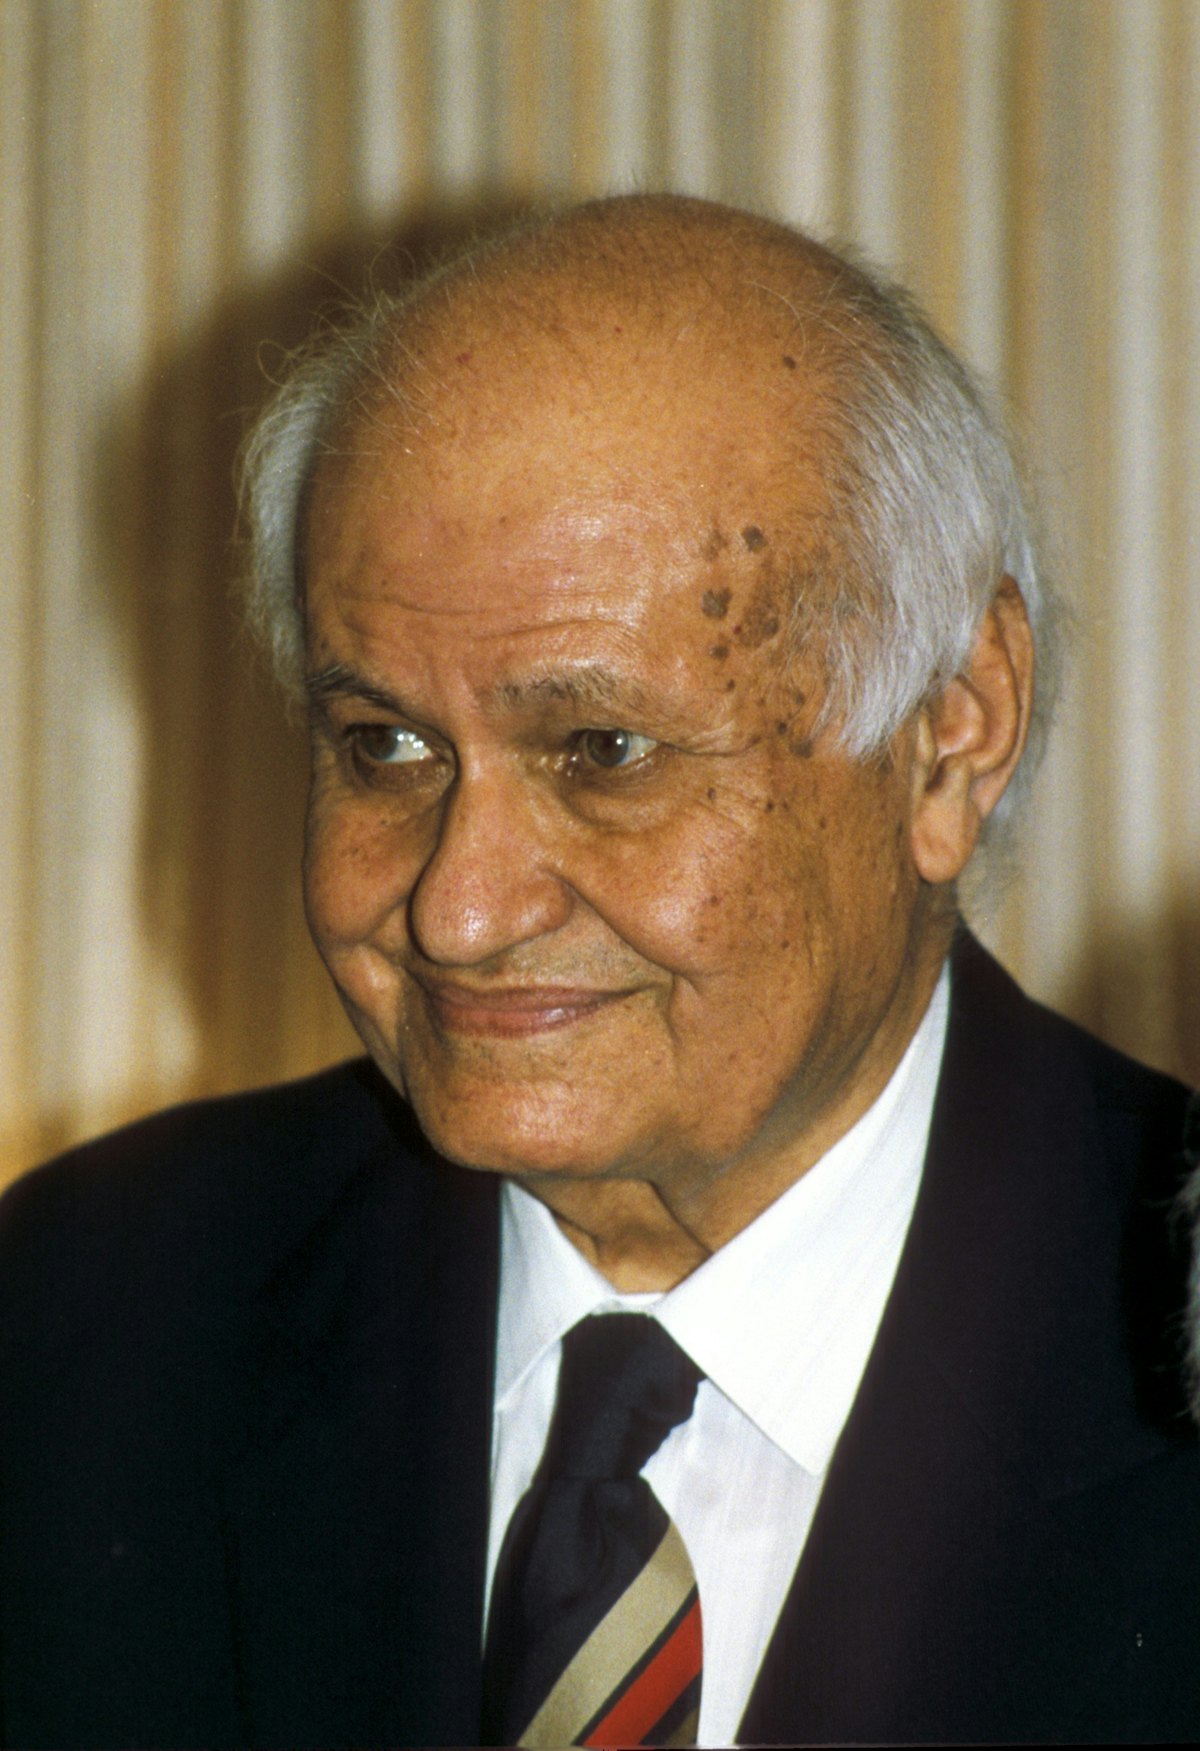 Dr. Varqa came from a distinguished Baha'i family in Iran and received his name from 'Abdu'l-Baha.